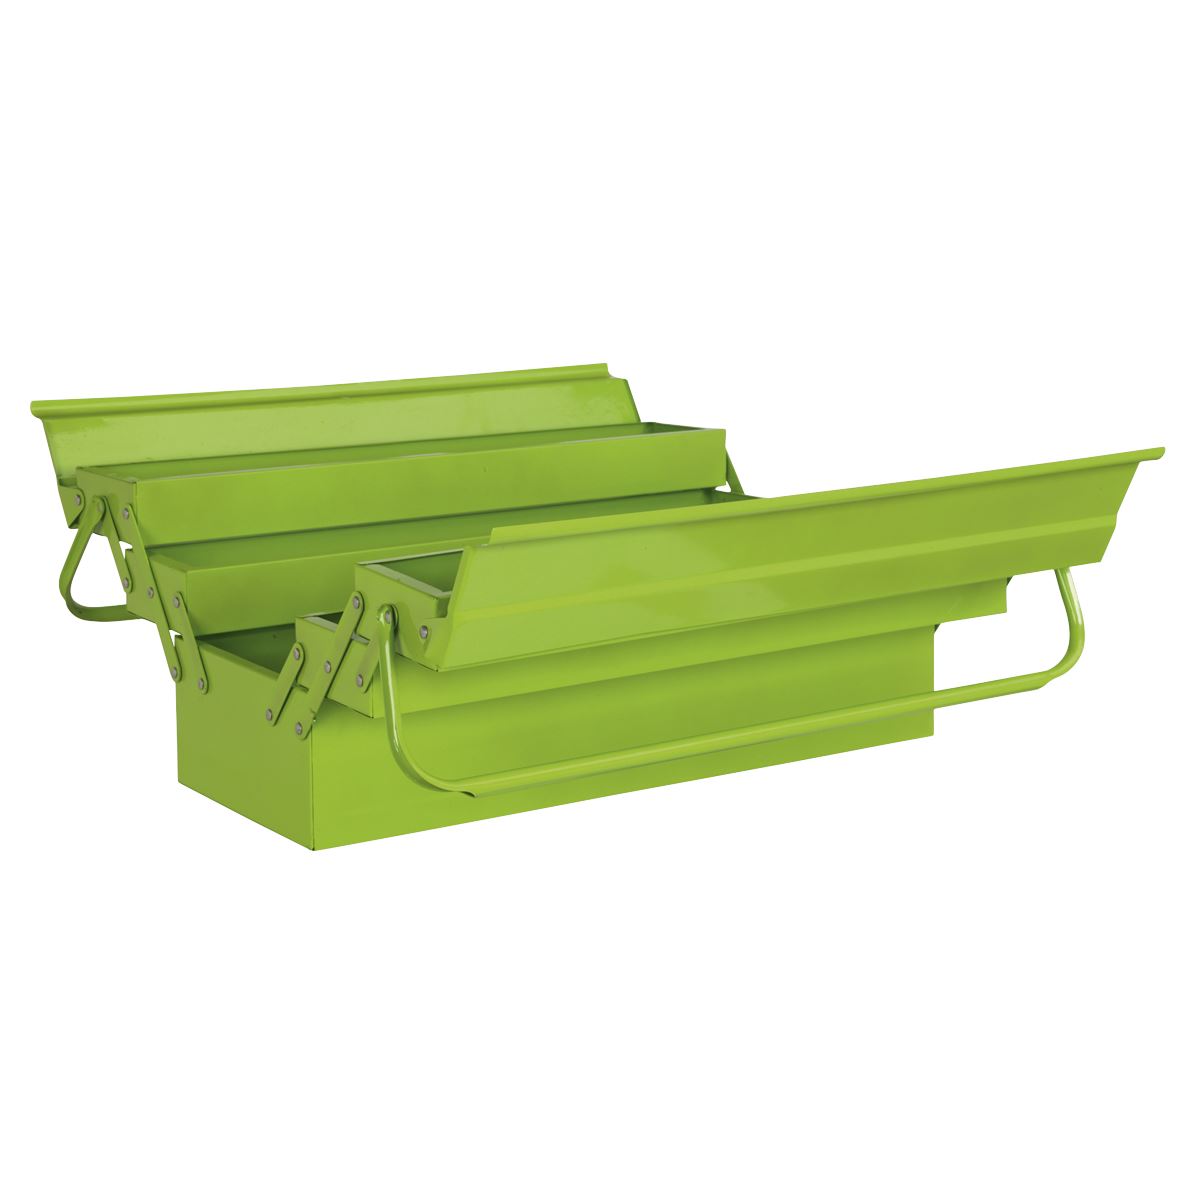 Sealey Cantilever Toolbox 4 Tray 530mm Green